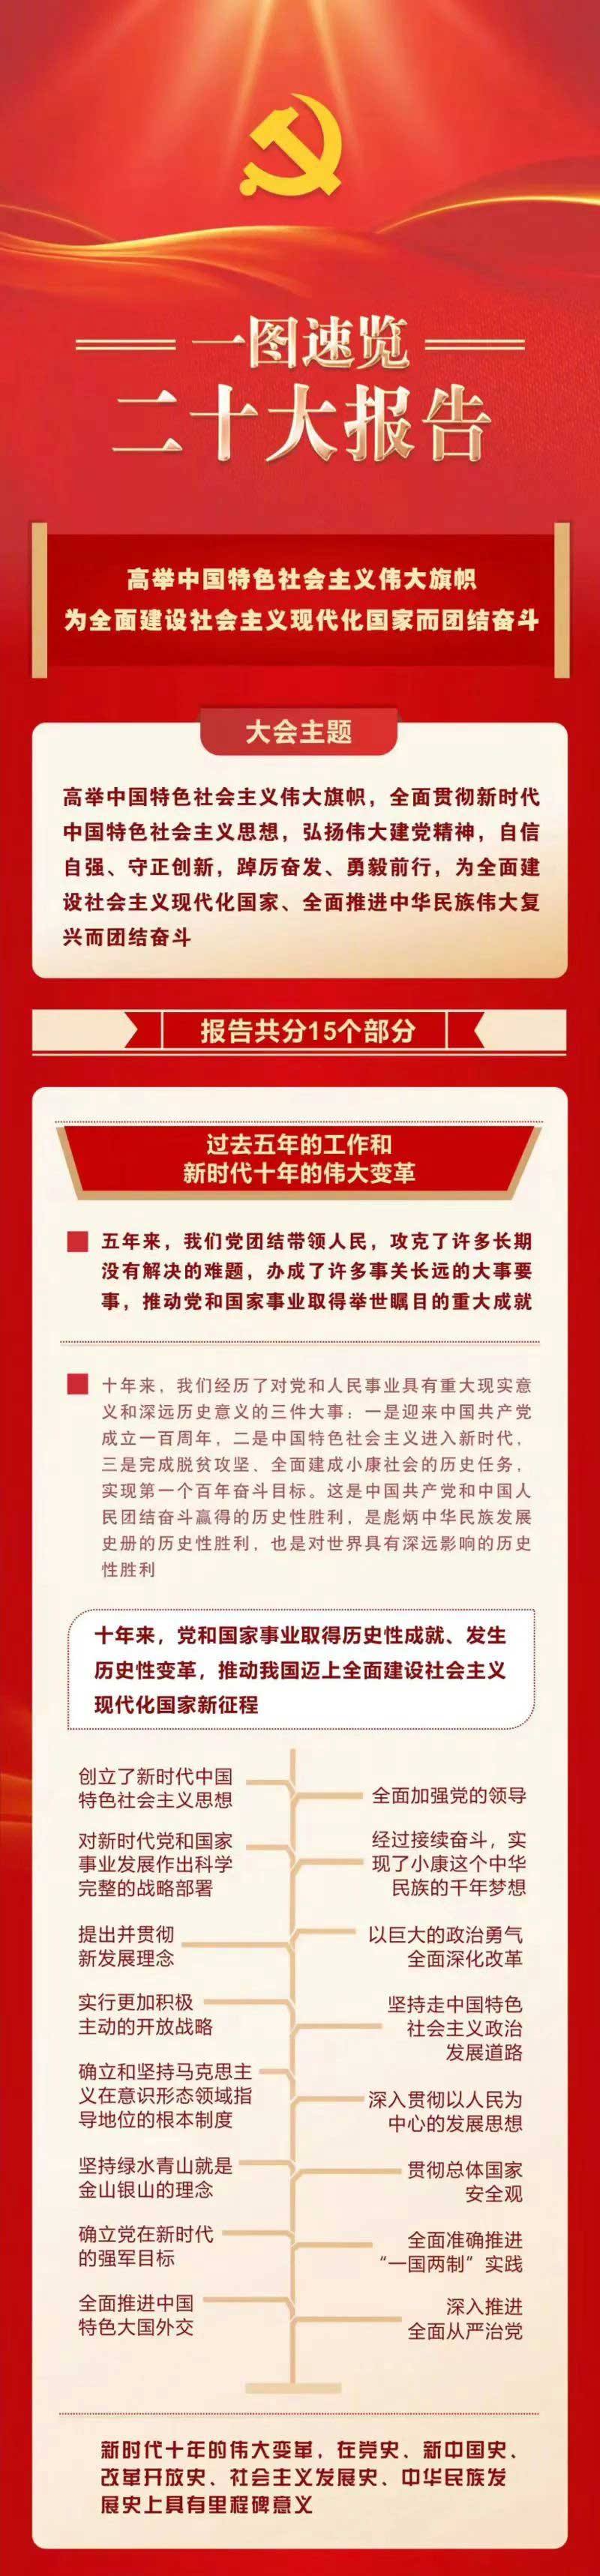 A quick overview of the report of the 20th National Congress of the Communist Party of China